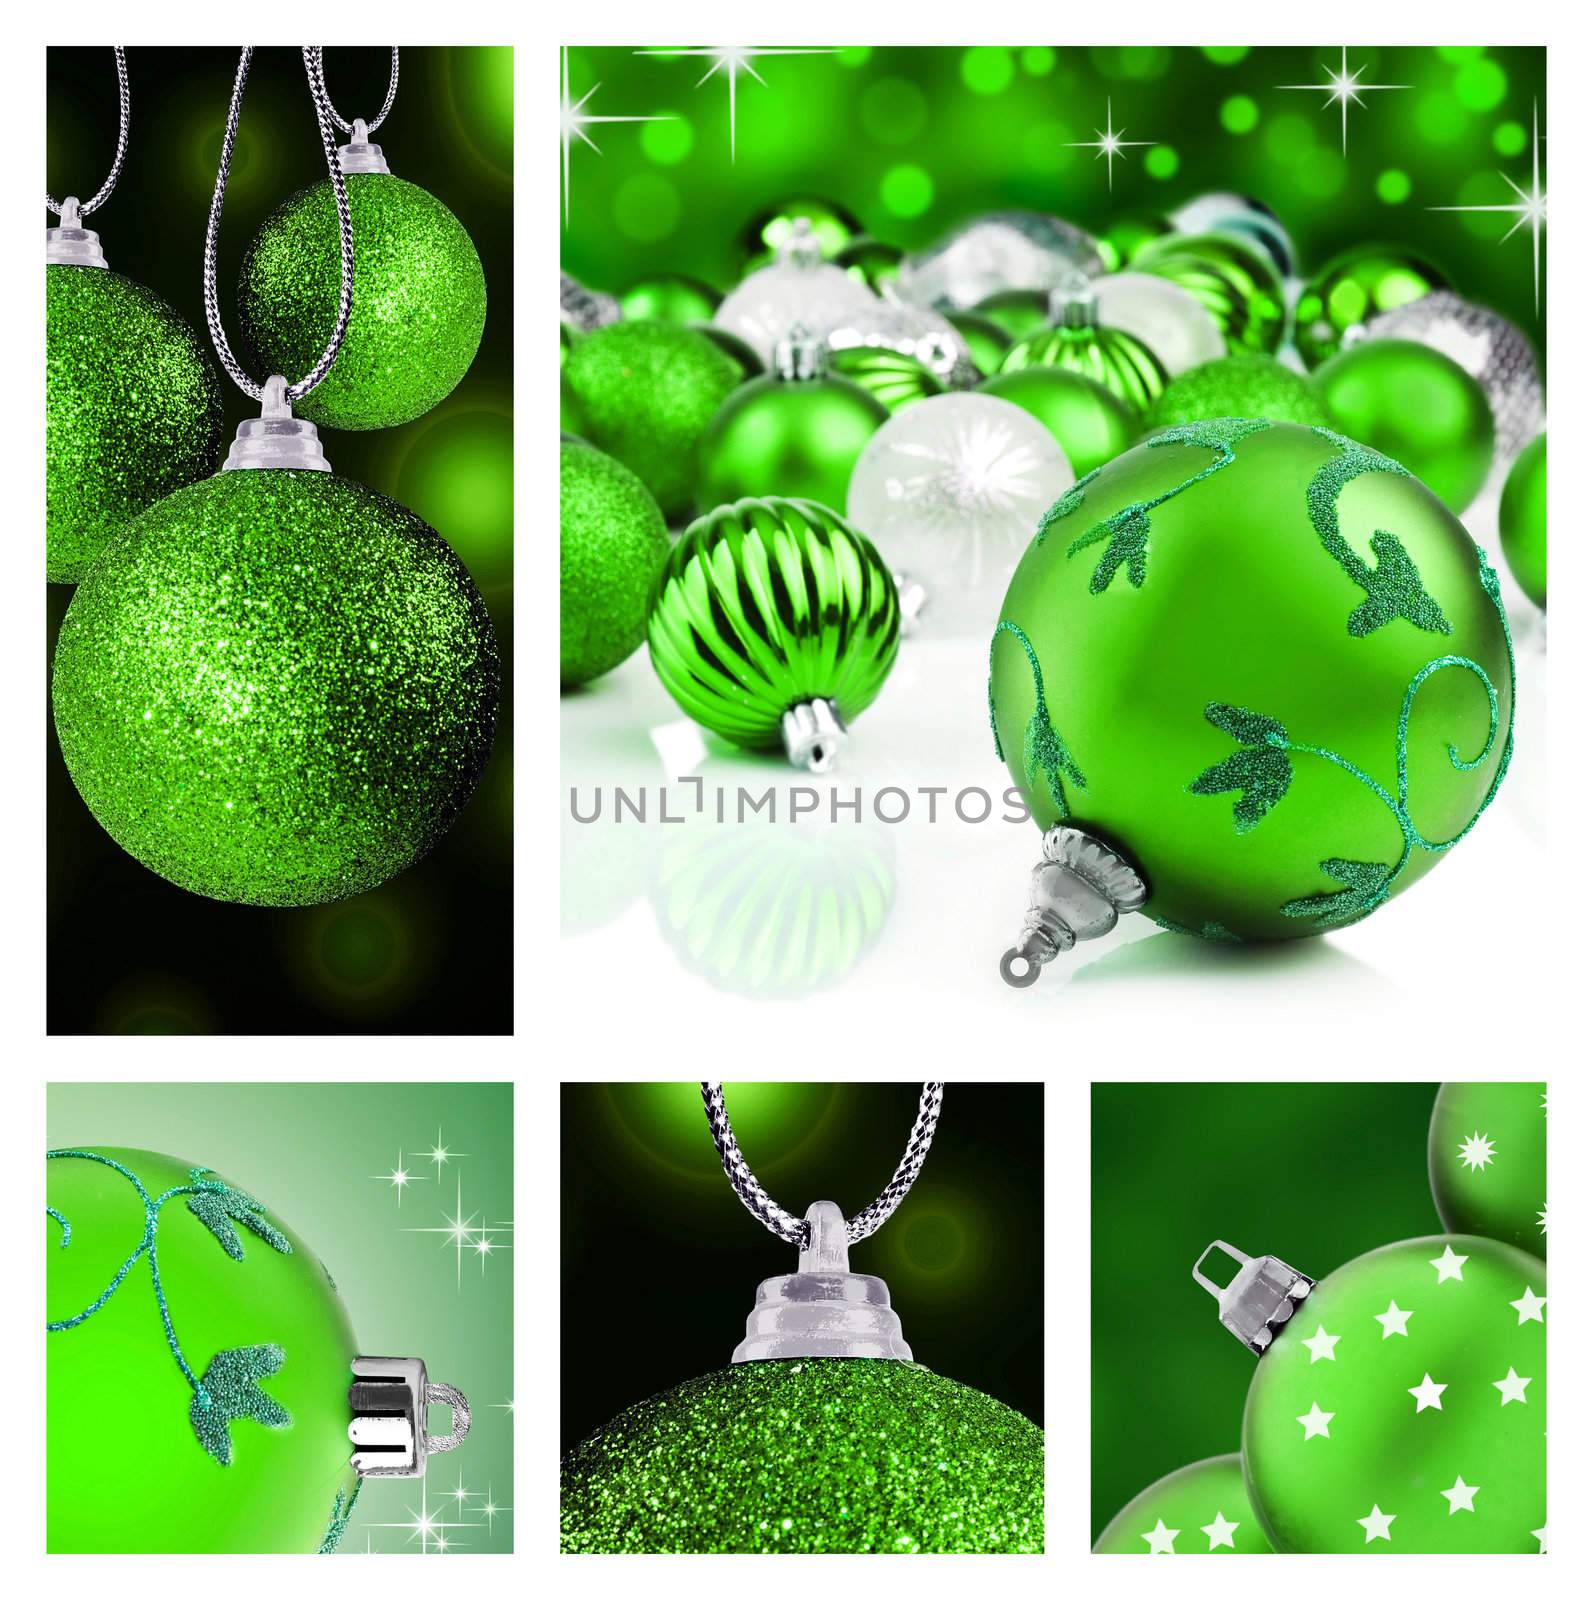 Collage of green christmas decorations